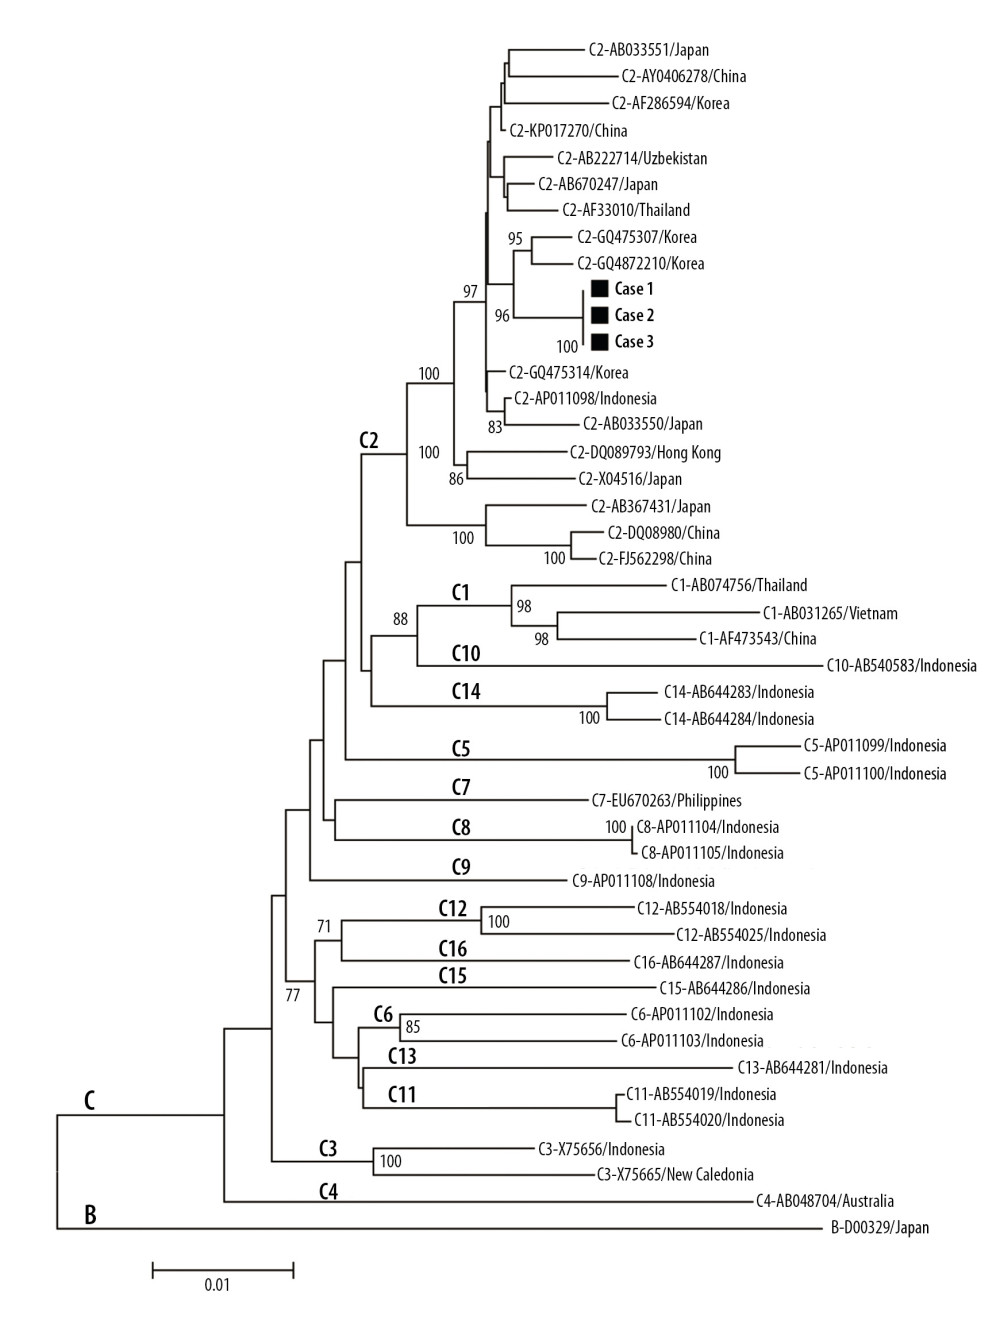 Phylogenetic tree of hepatitis B virus DNA. Sequencing of HBV revealed that all three patients were infected with identical subgenotype C2 HBV sequences.